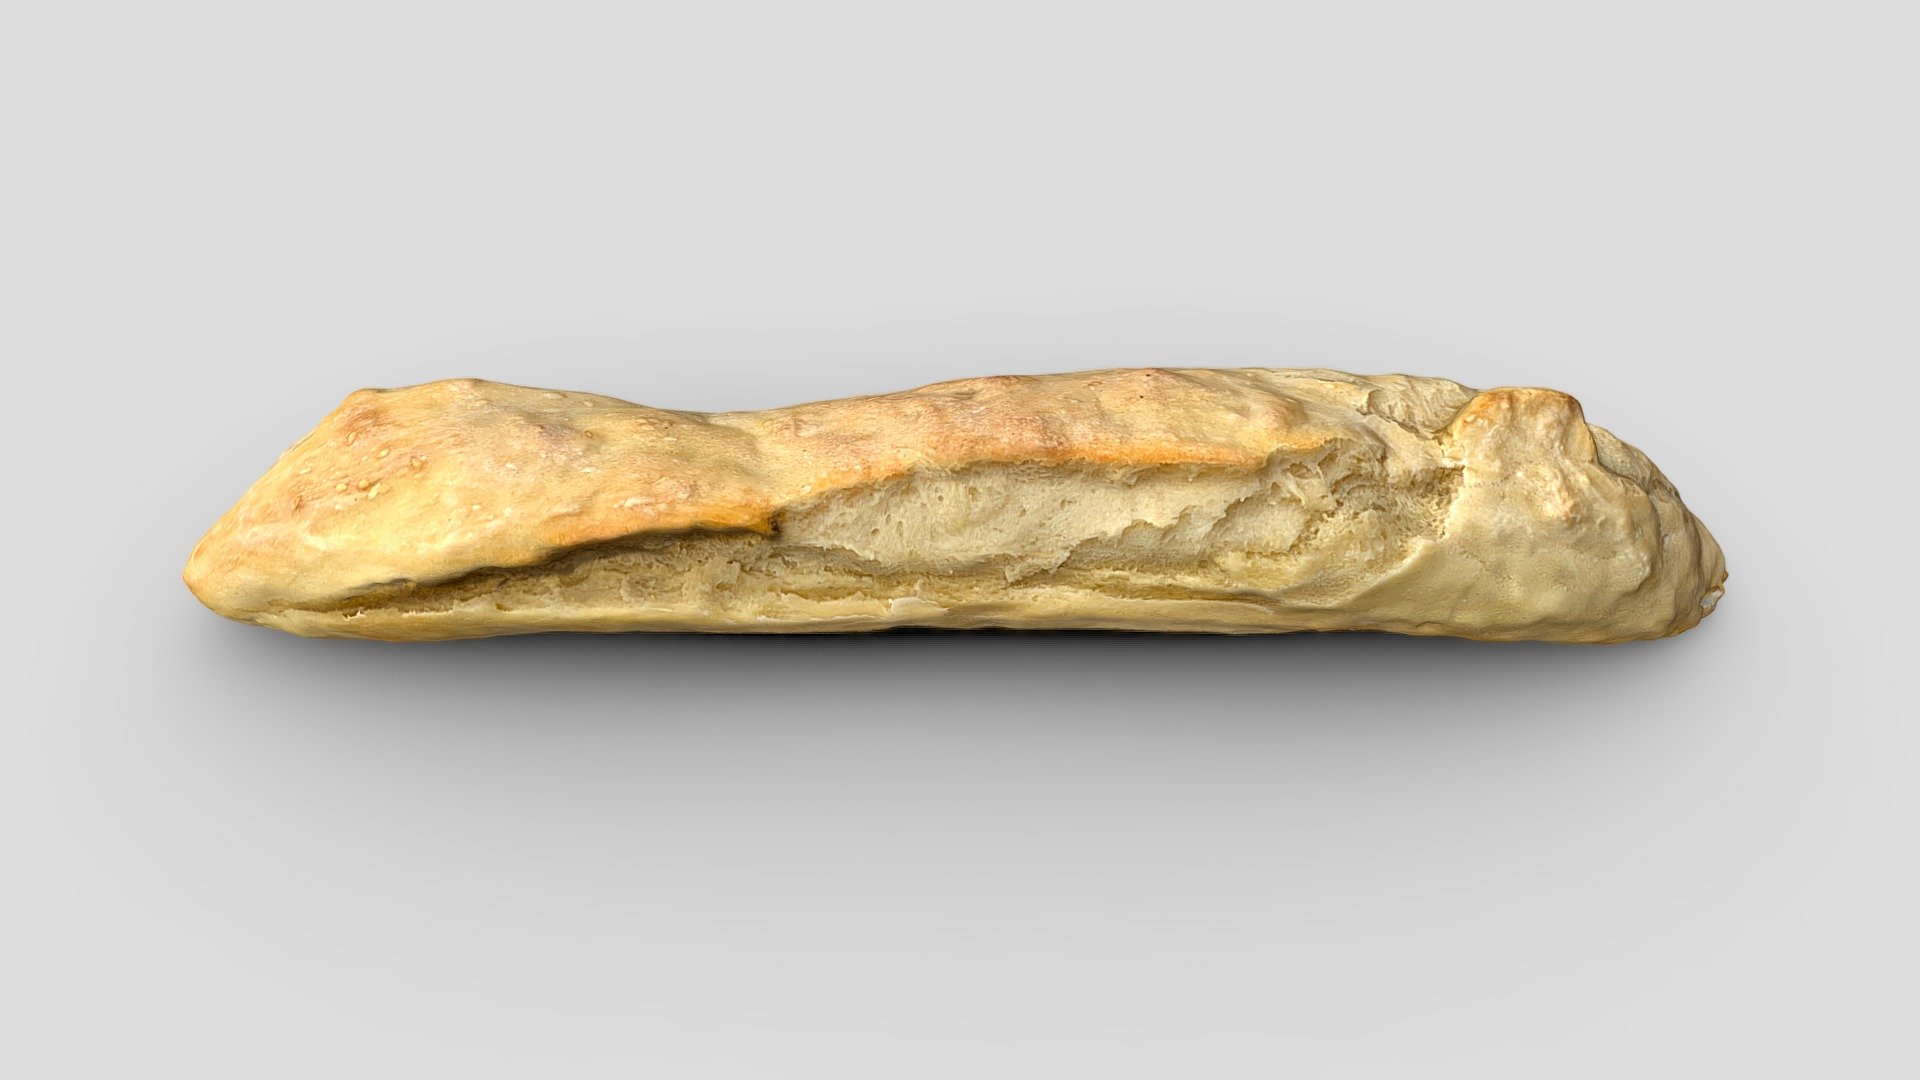 This is the first baguette I have ever made. The recipe is super simple, super fast, and it tastes really good!

3D scanned with 171 pics for the top, 121 pics for the bottom, processed in 2 combined clouds with Metashape

An entry for the baked goods scanning challenge :) - My first home made baguette - Buy Royalty Free 3D model by alban 3d model